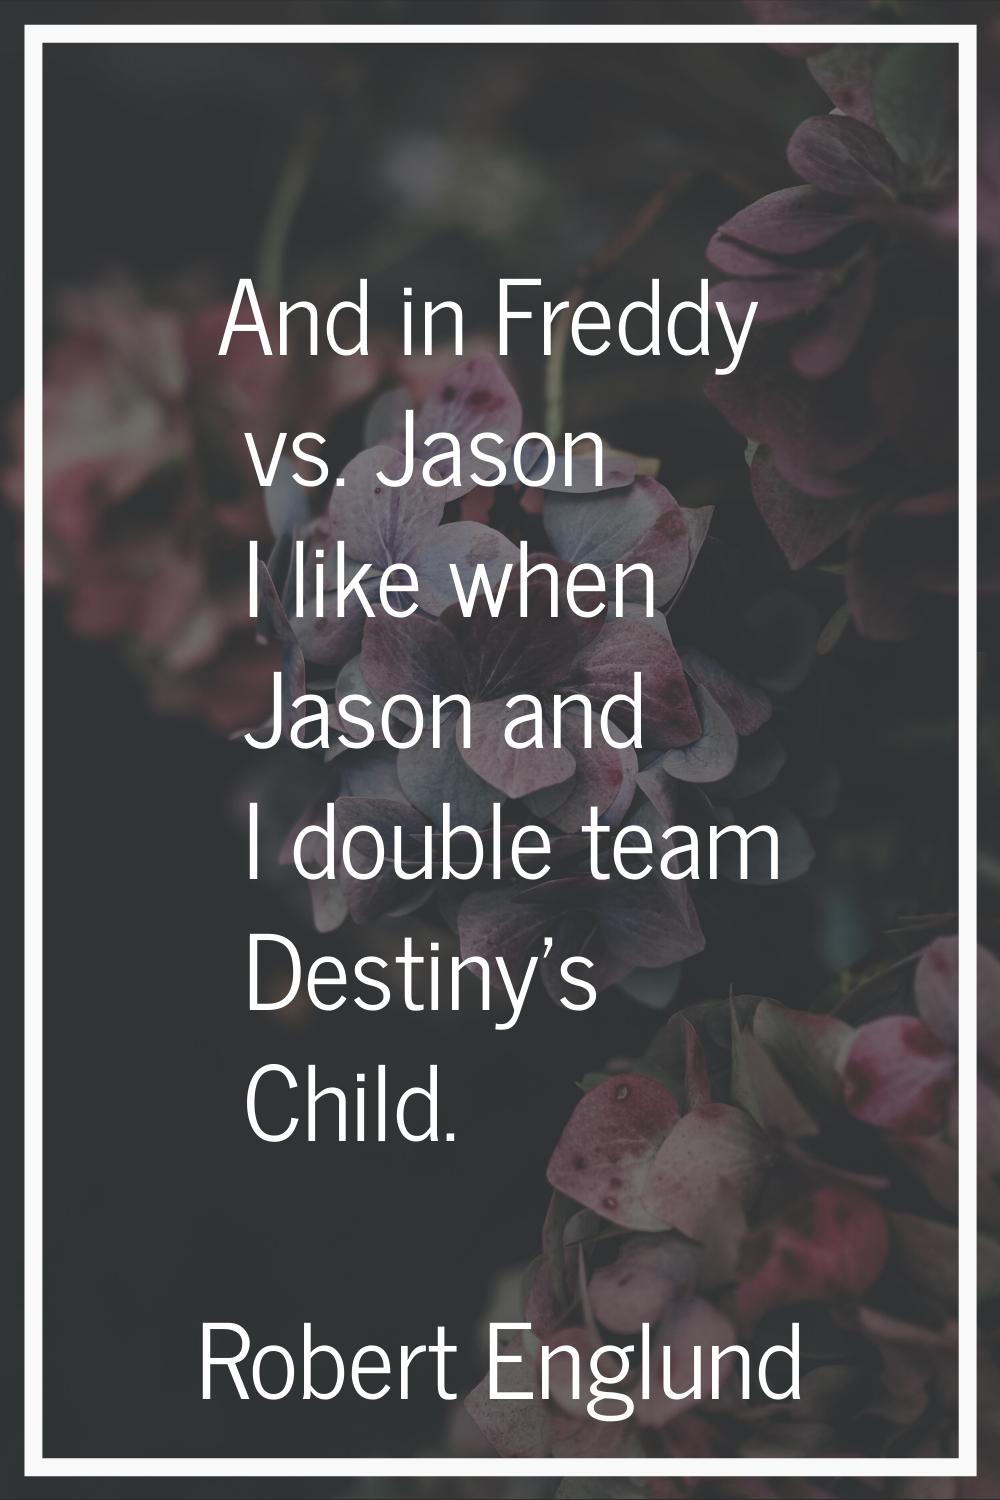 And in Freddy vs. Jason I like when Jason and I double team Destiny's Child.